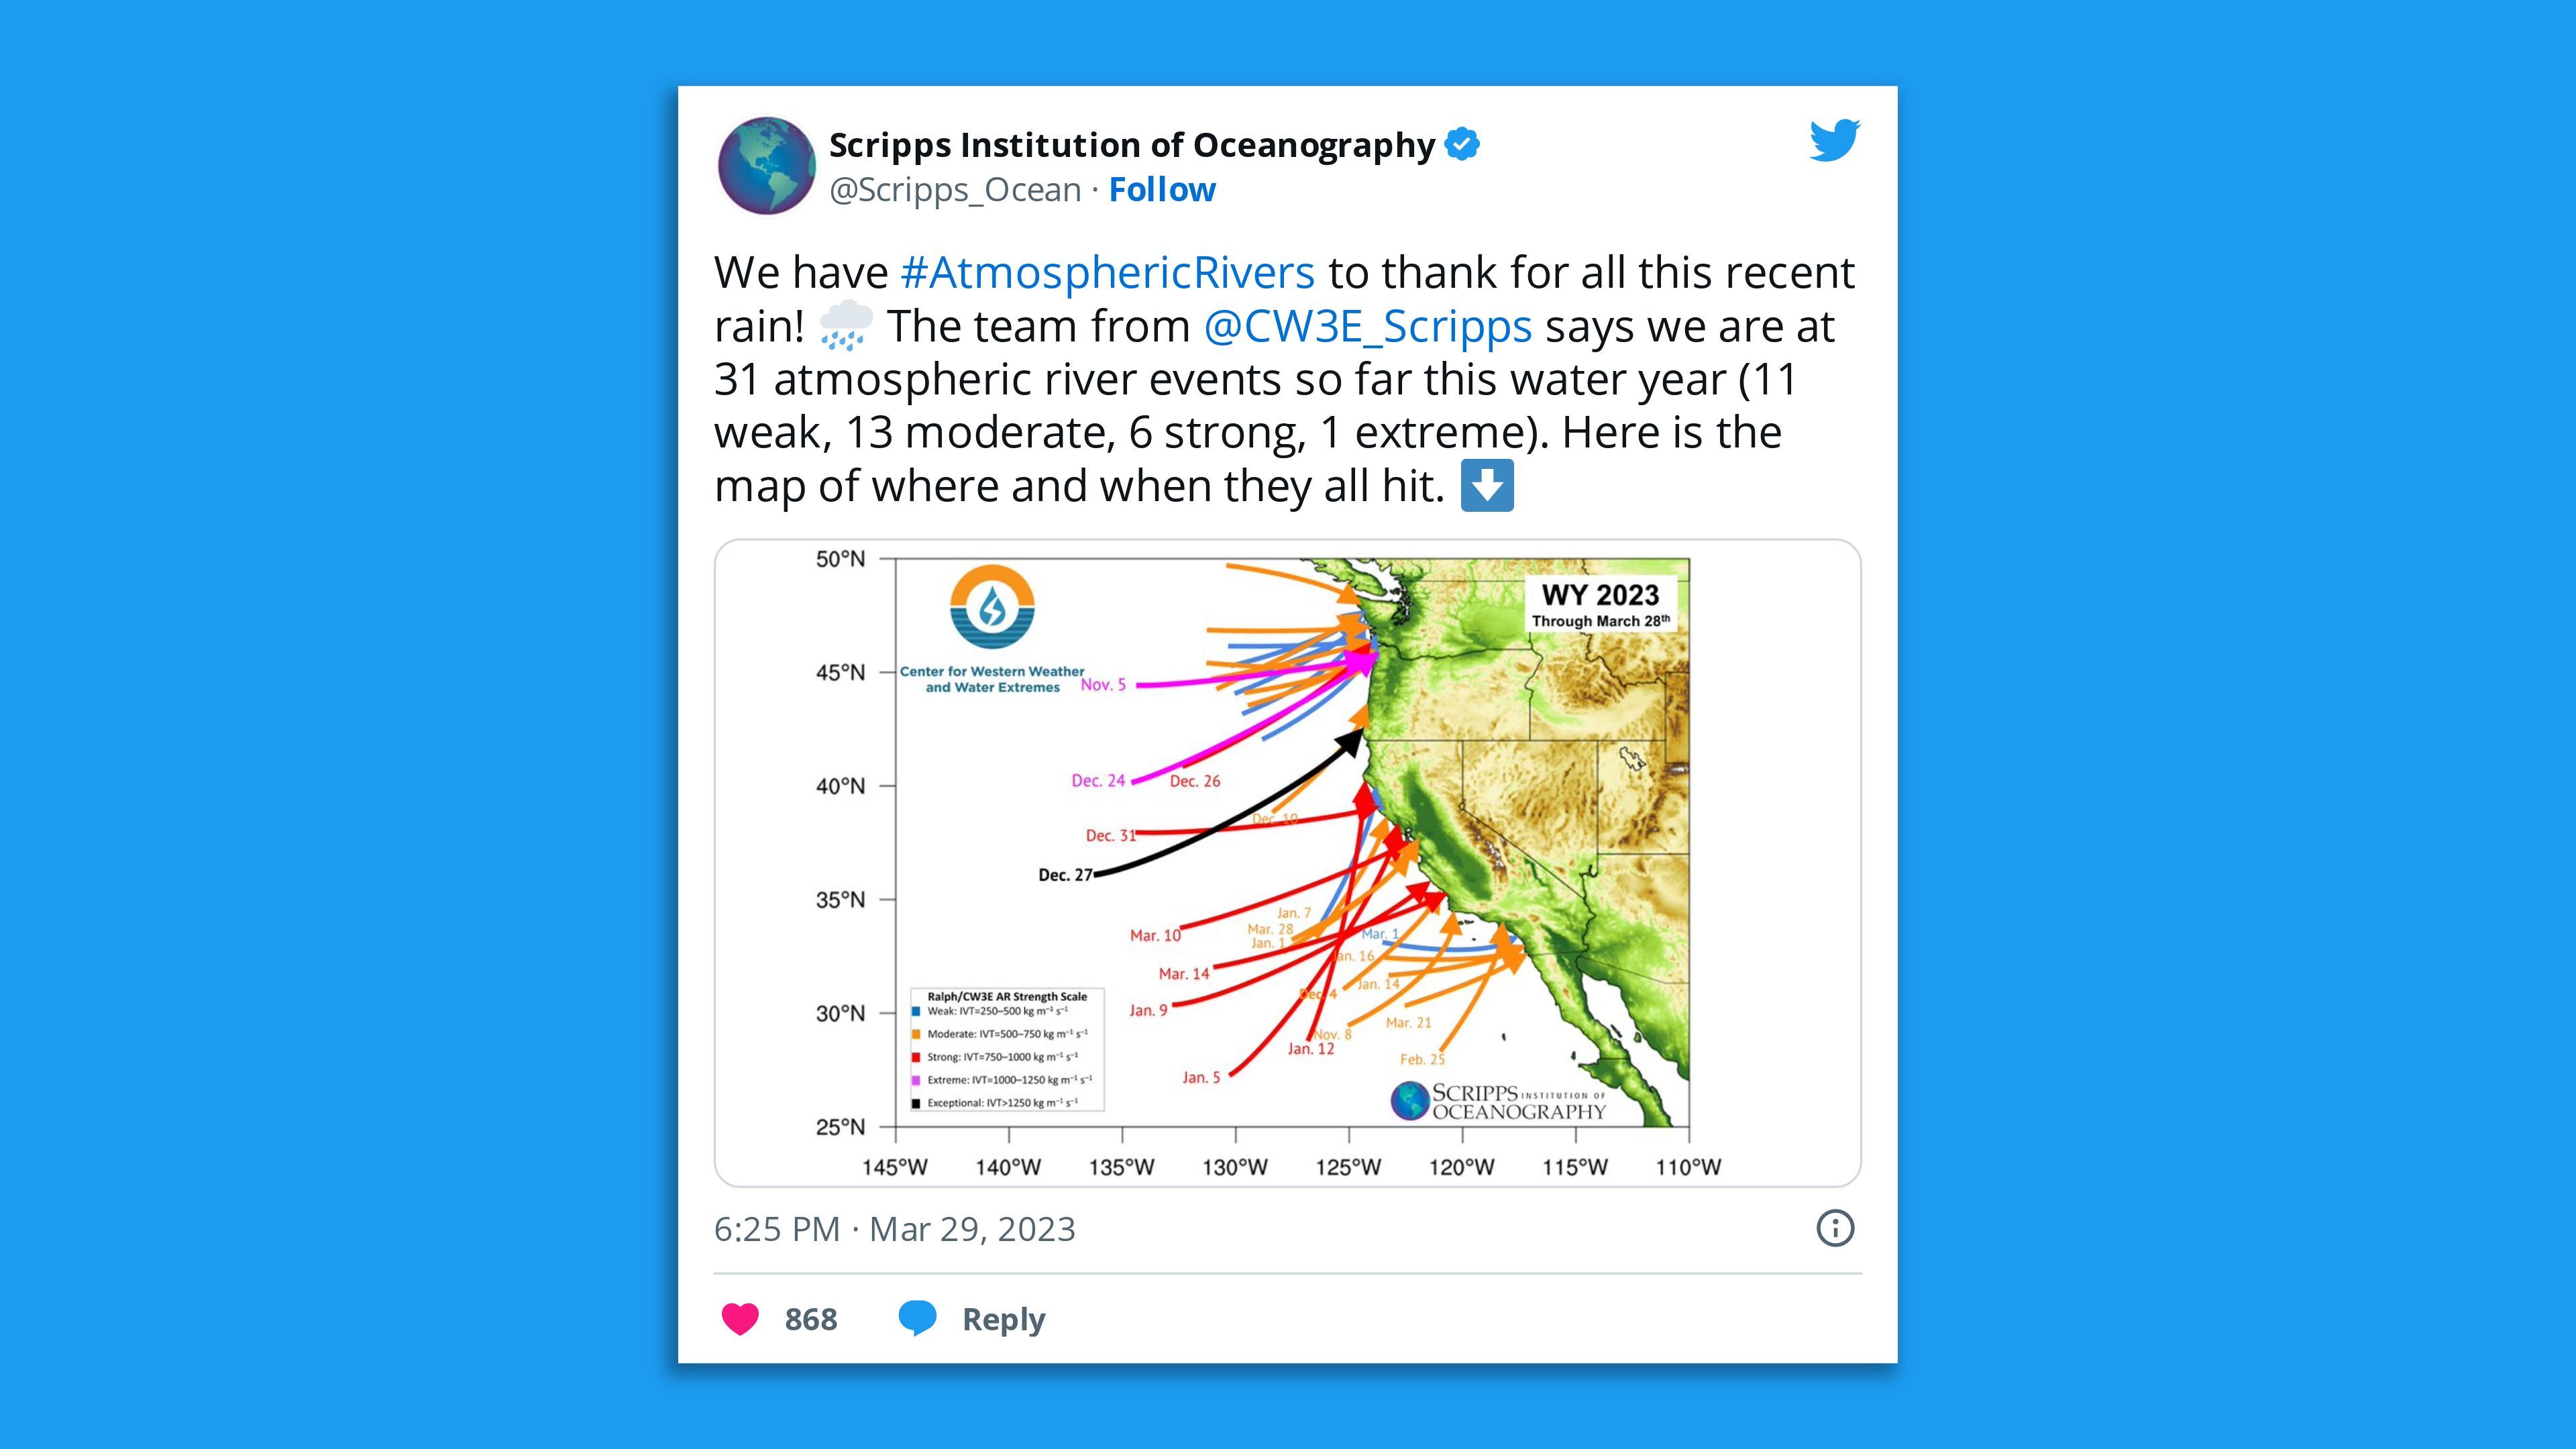 A screenshot of a tweet from Scripps Institution of Oceanography saying "We have #AtmosphericRivers to thank for all this recent rain! 🌧️ The team from  @CW3E_Scripps  says we are at 31 atmospheric river events so far this water year (11 weak, 13 moderate, 6 strong, 1 extreme)."